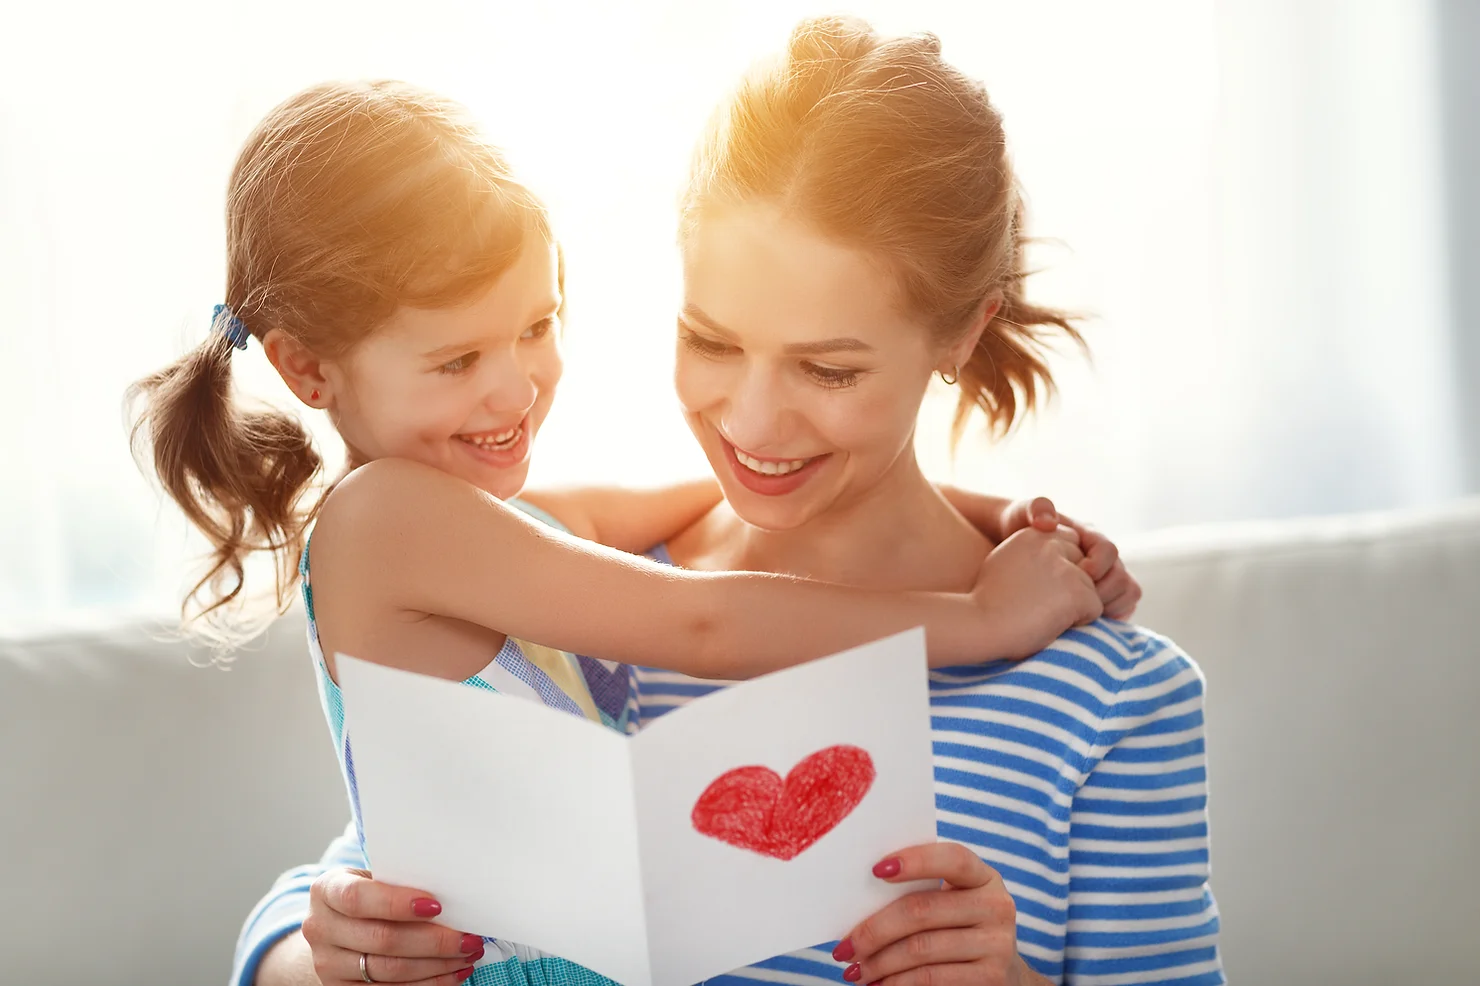 A daughter celebrates her mother on Mothers Day with a card full of love